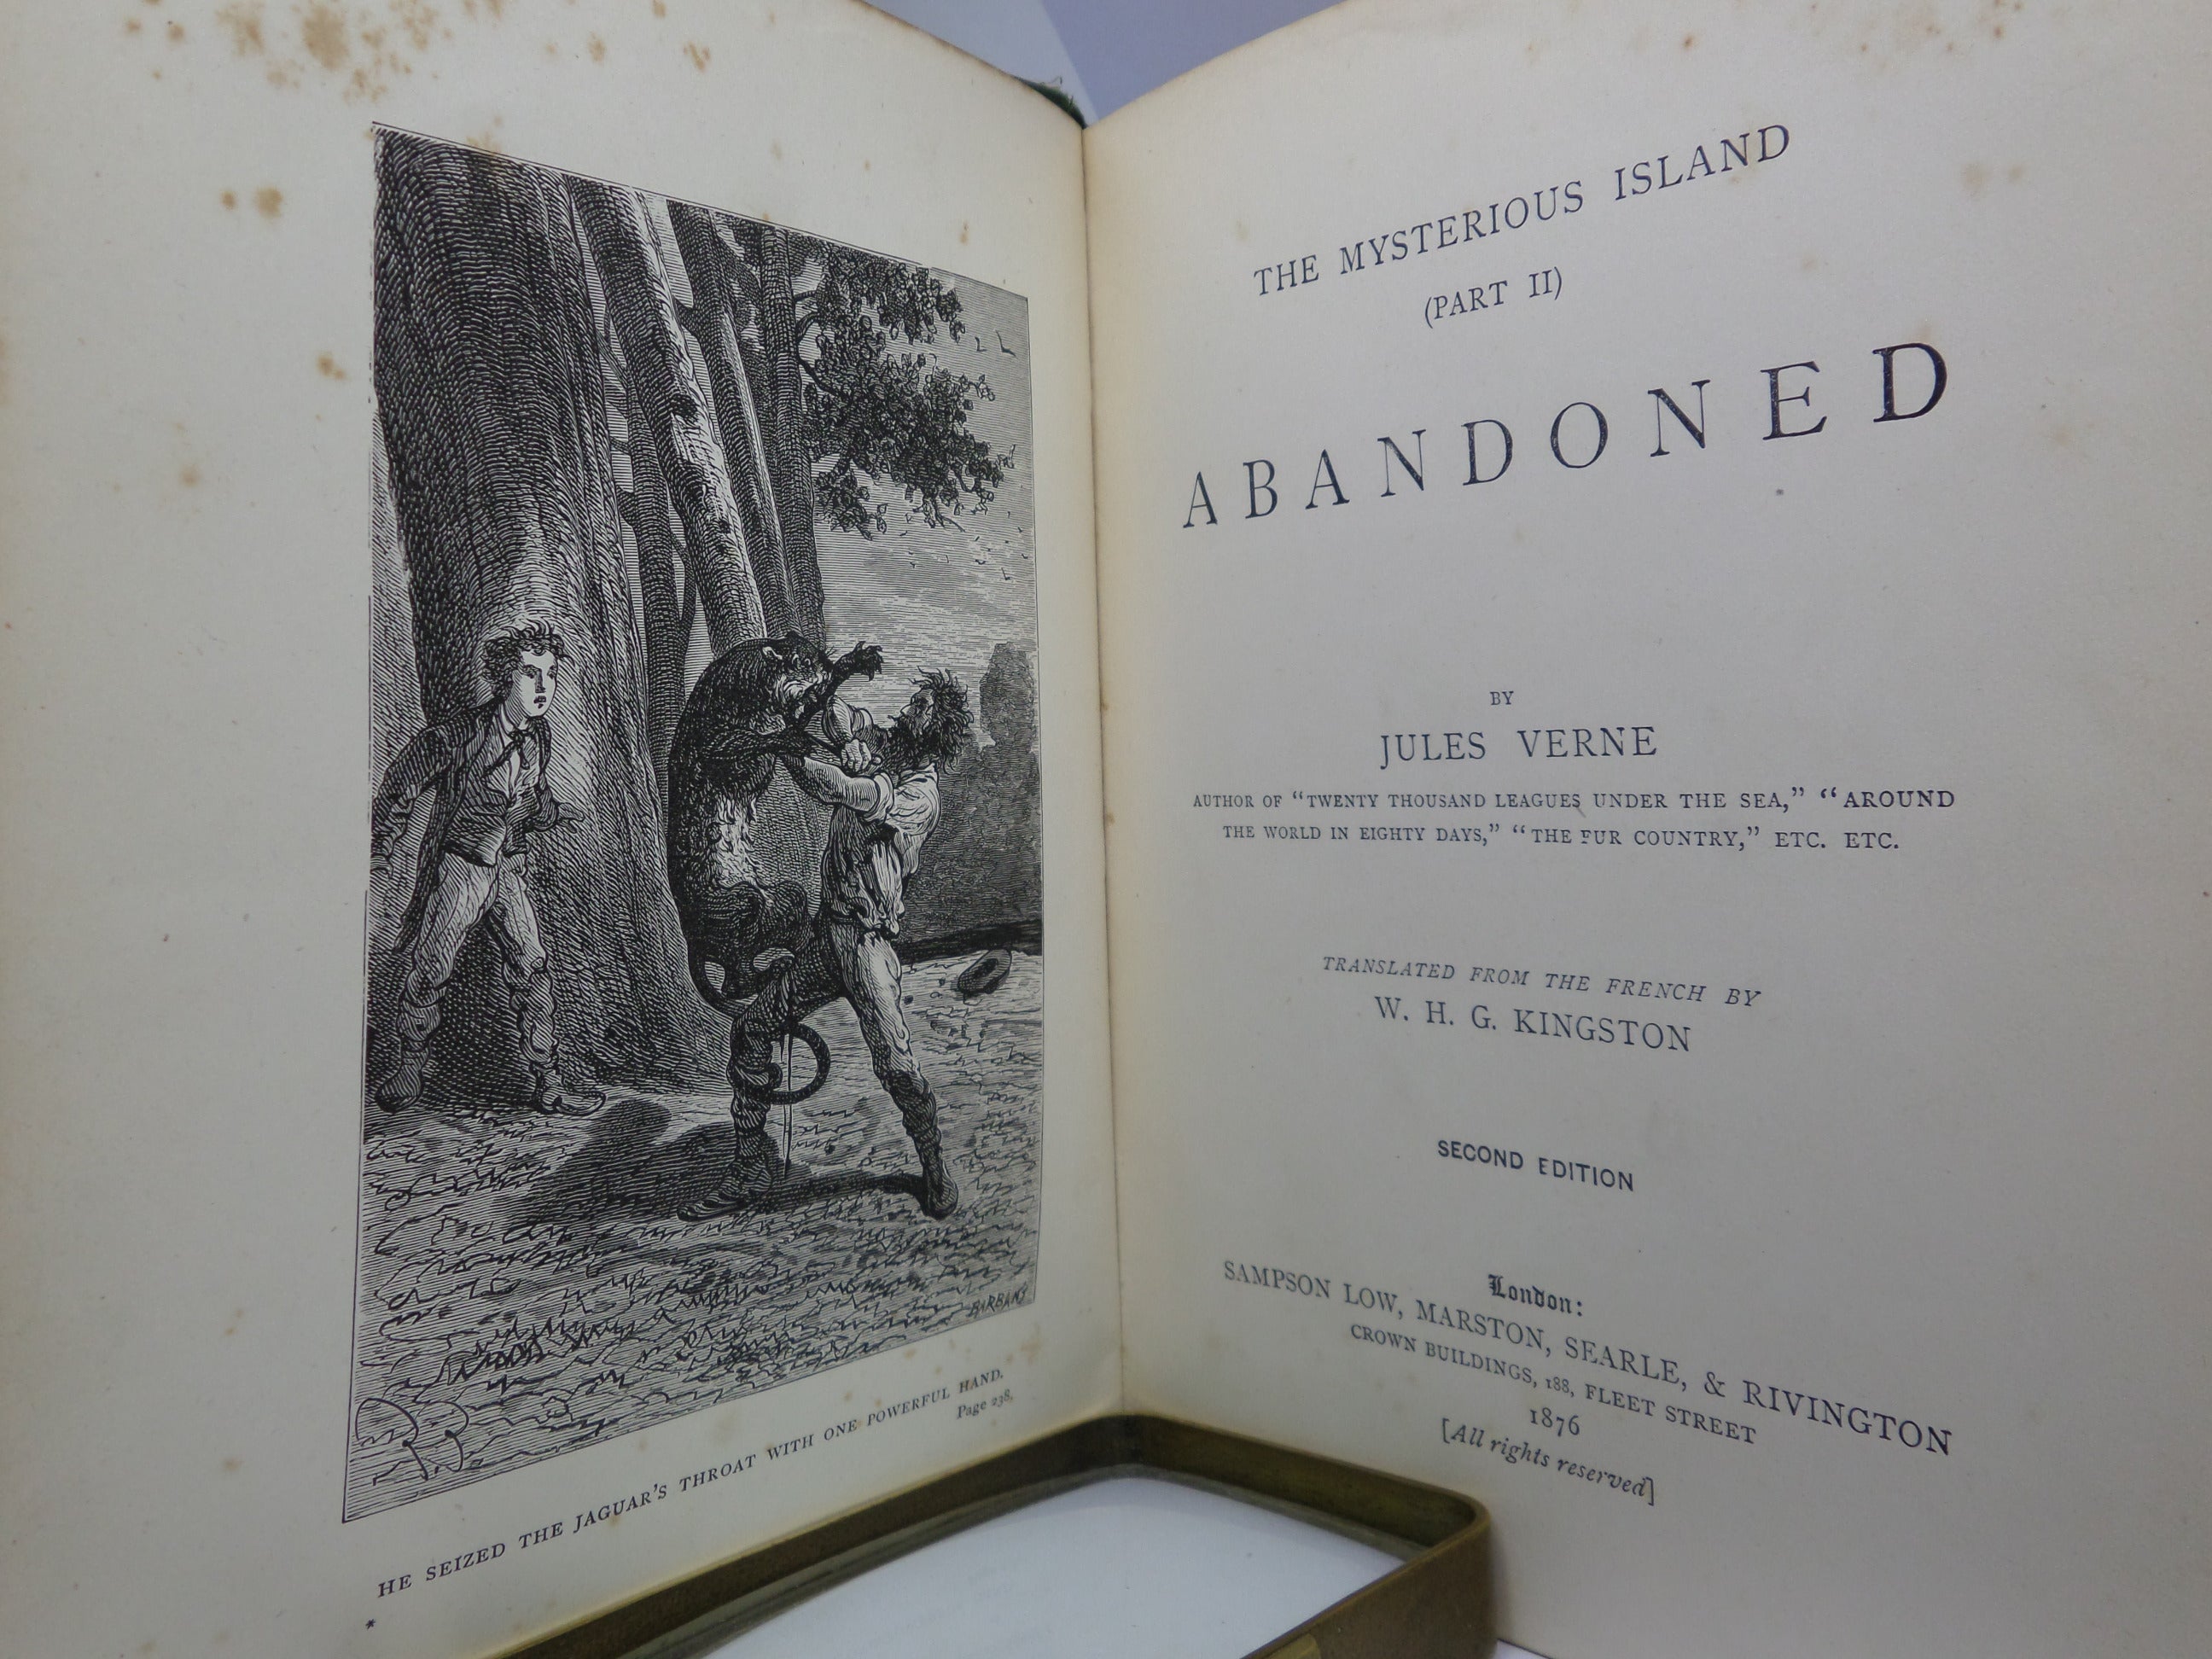 [THE MYSTERIOUS ISLAND PART II] ABANDONED BY JULES VERNE 1876 SECOND EDITION